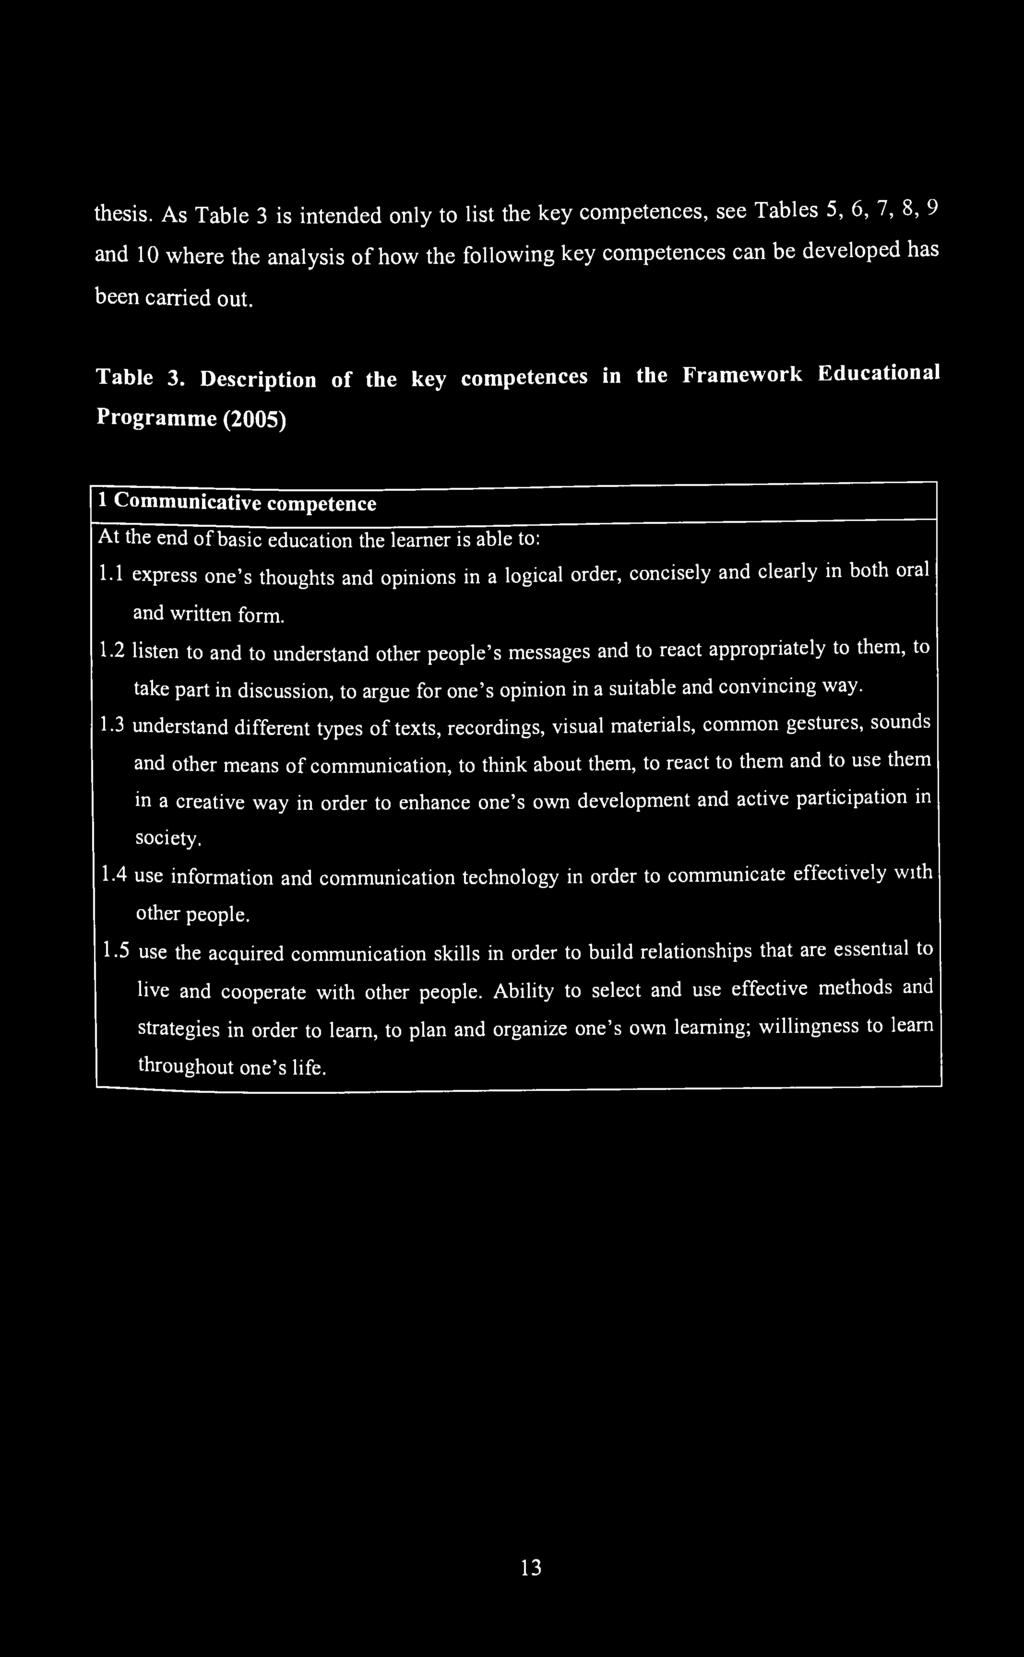 thesis. As Table 3 is intended only to list the key competences, see Tables 5, 6, 7, 8, 9 and 10 where the analysis of how the following key competences can be developed has been carried out. Table 3. Description of the key competences in the Framework Educational Programme (2005) 1 Communicative competence At the end of basic education the learner is able to: 1.